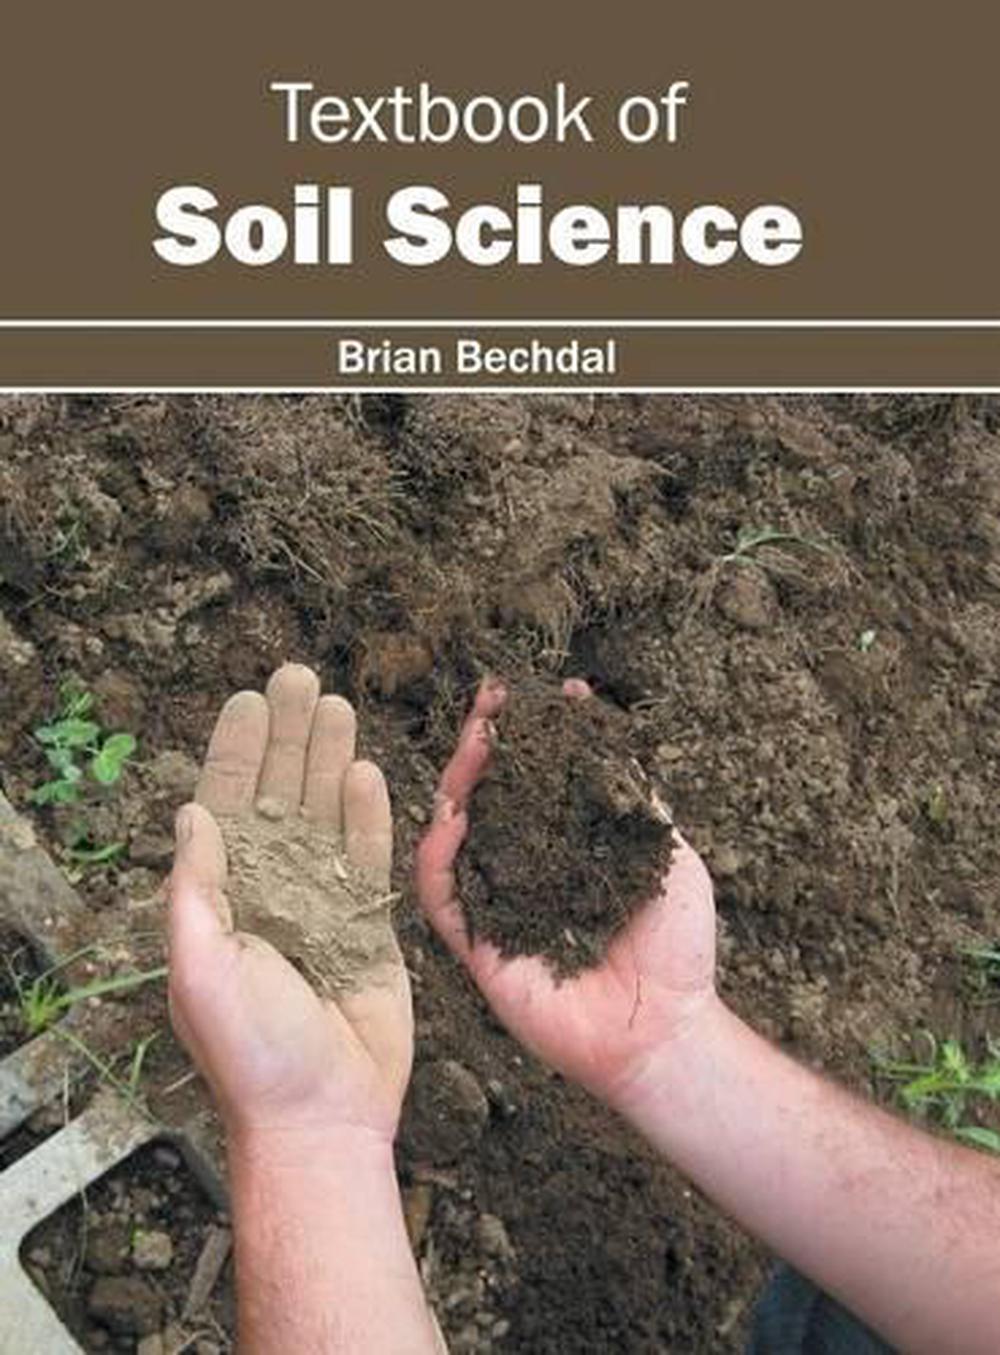 dissertation topics in soil microbiology